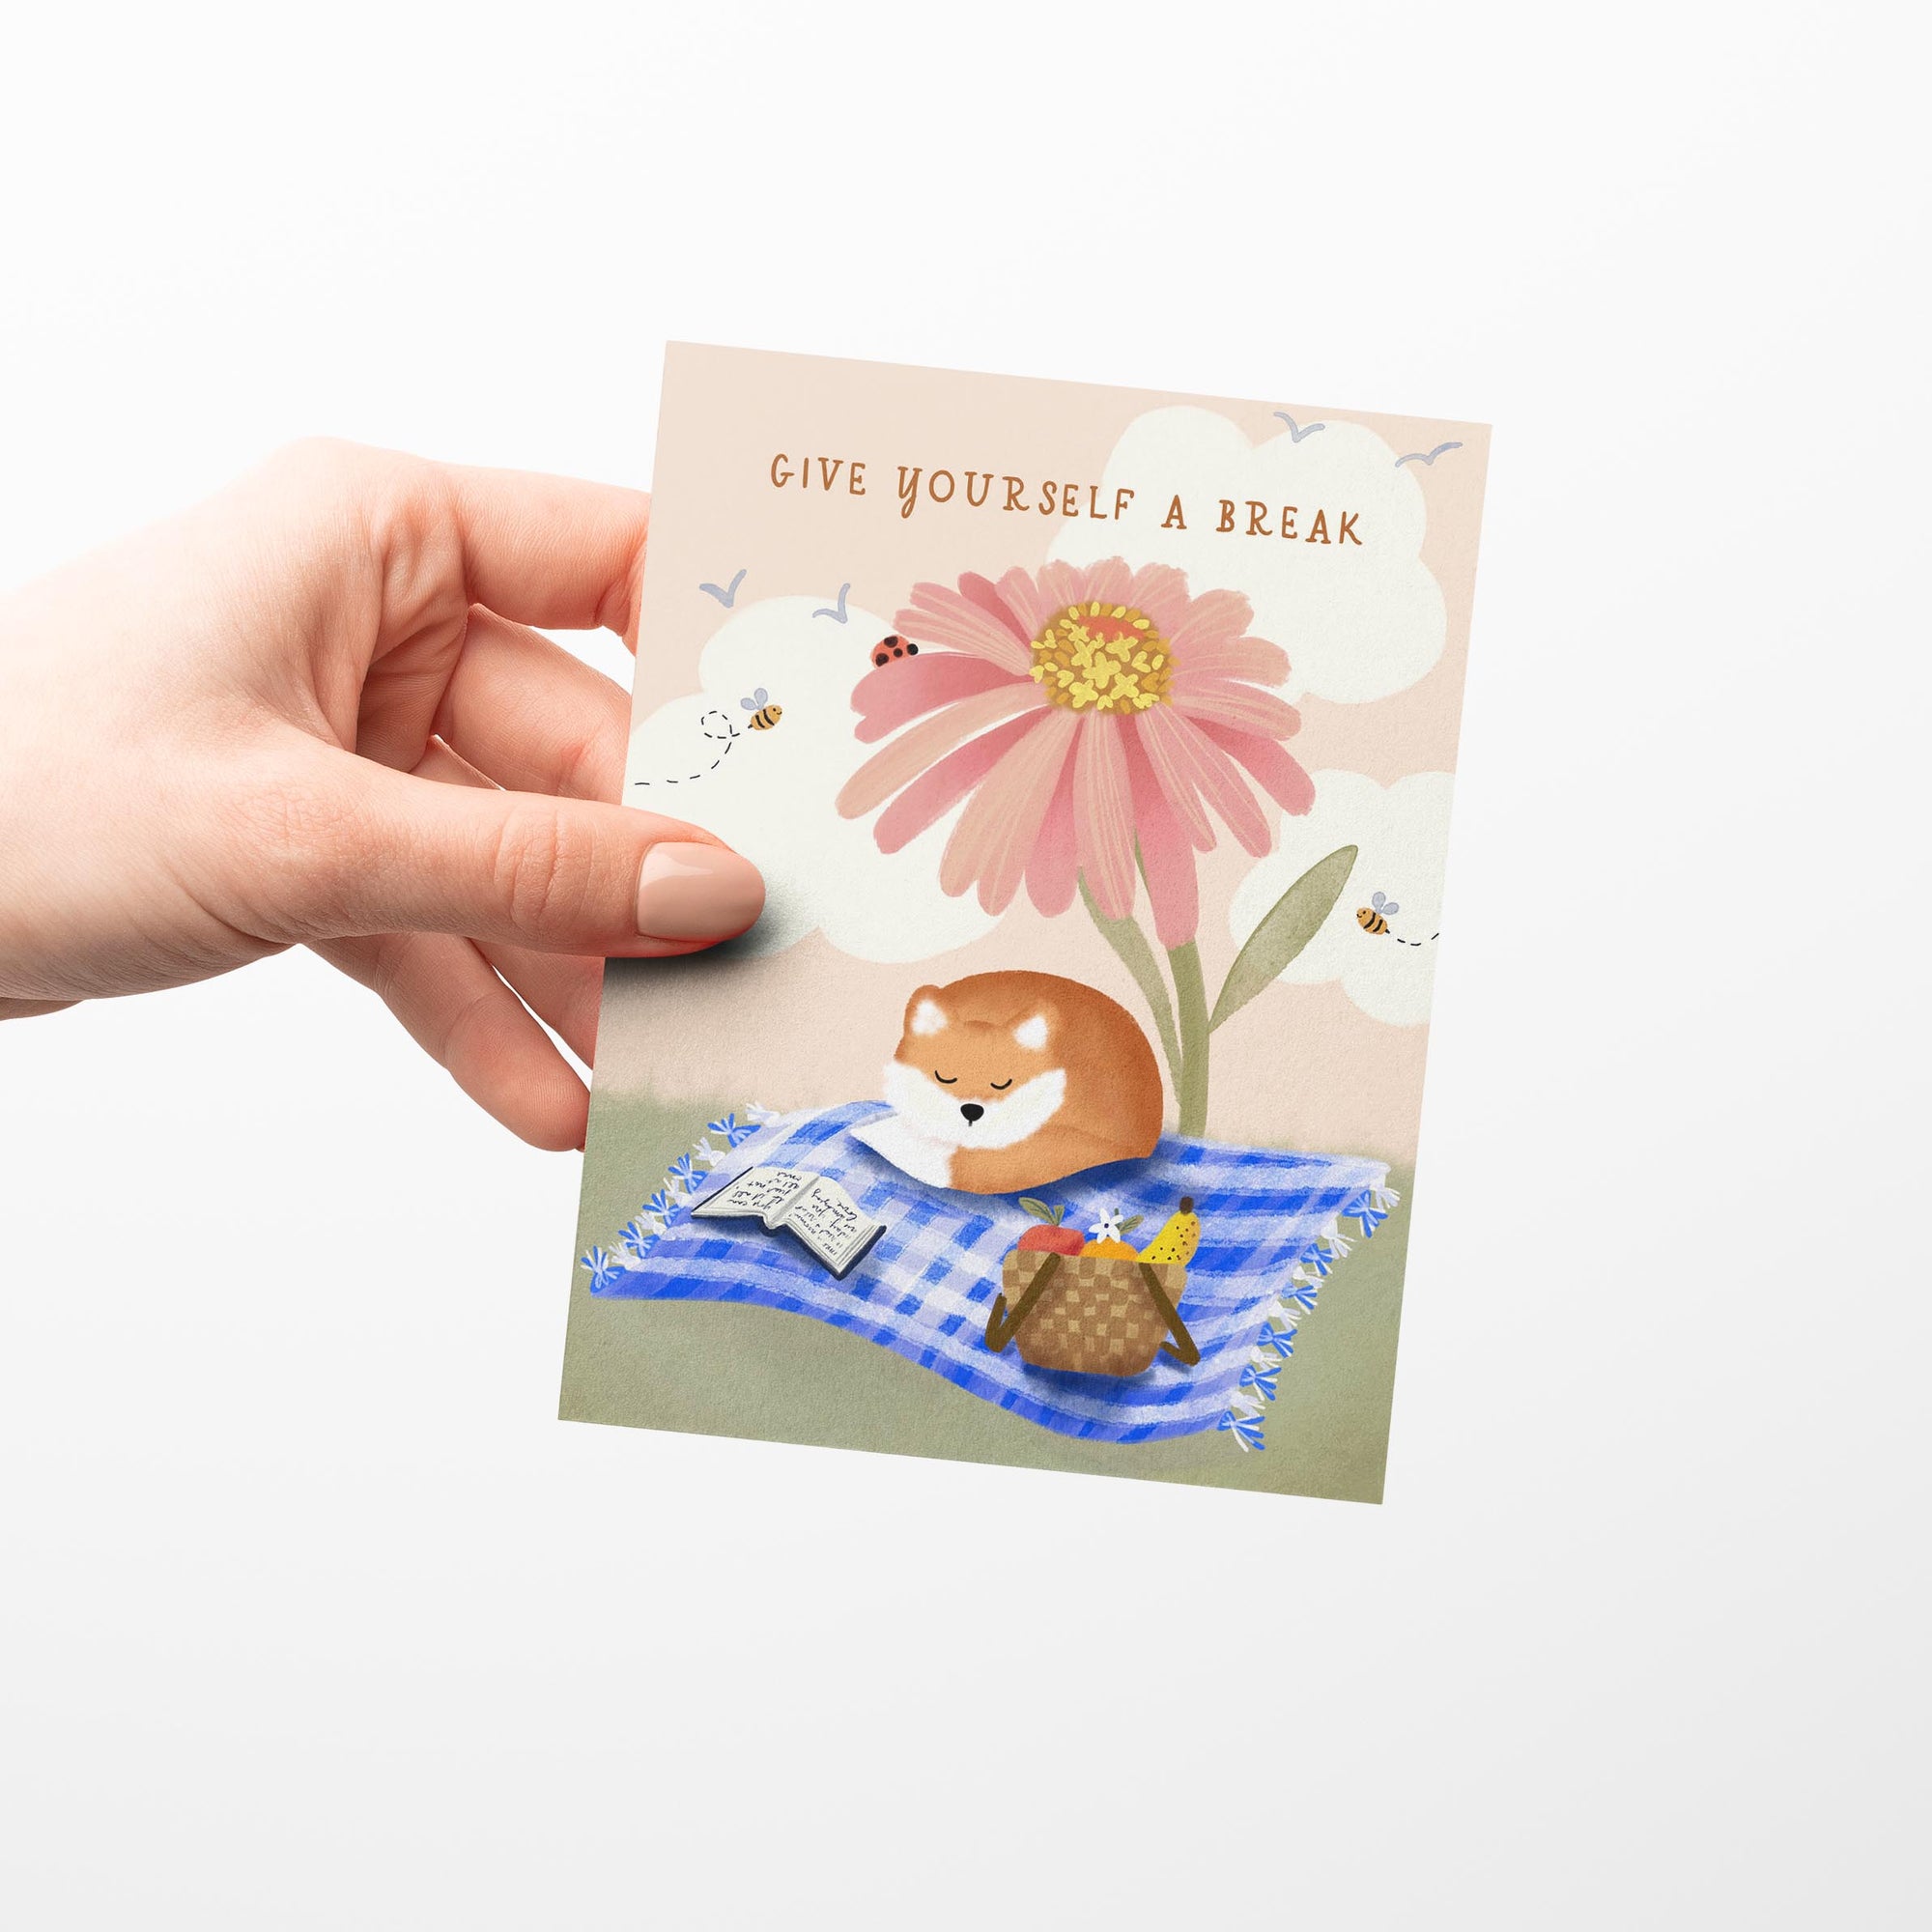 Give Yourself A Break Encouragement Card